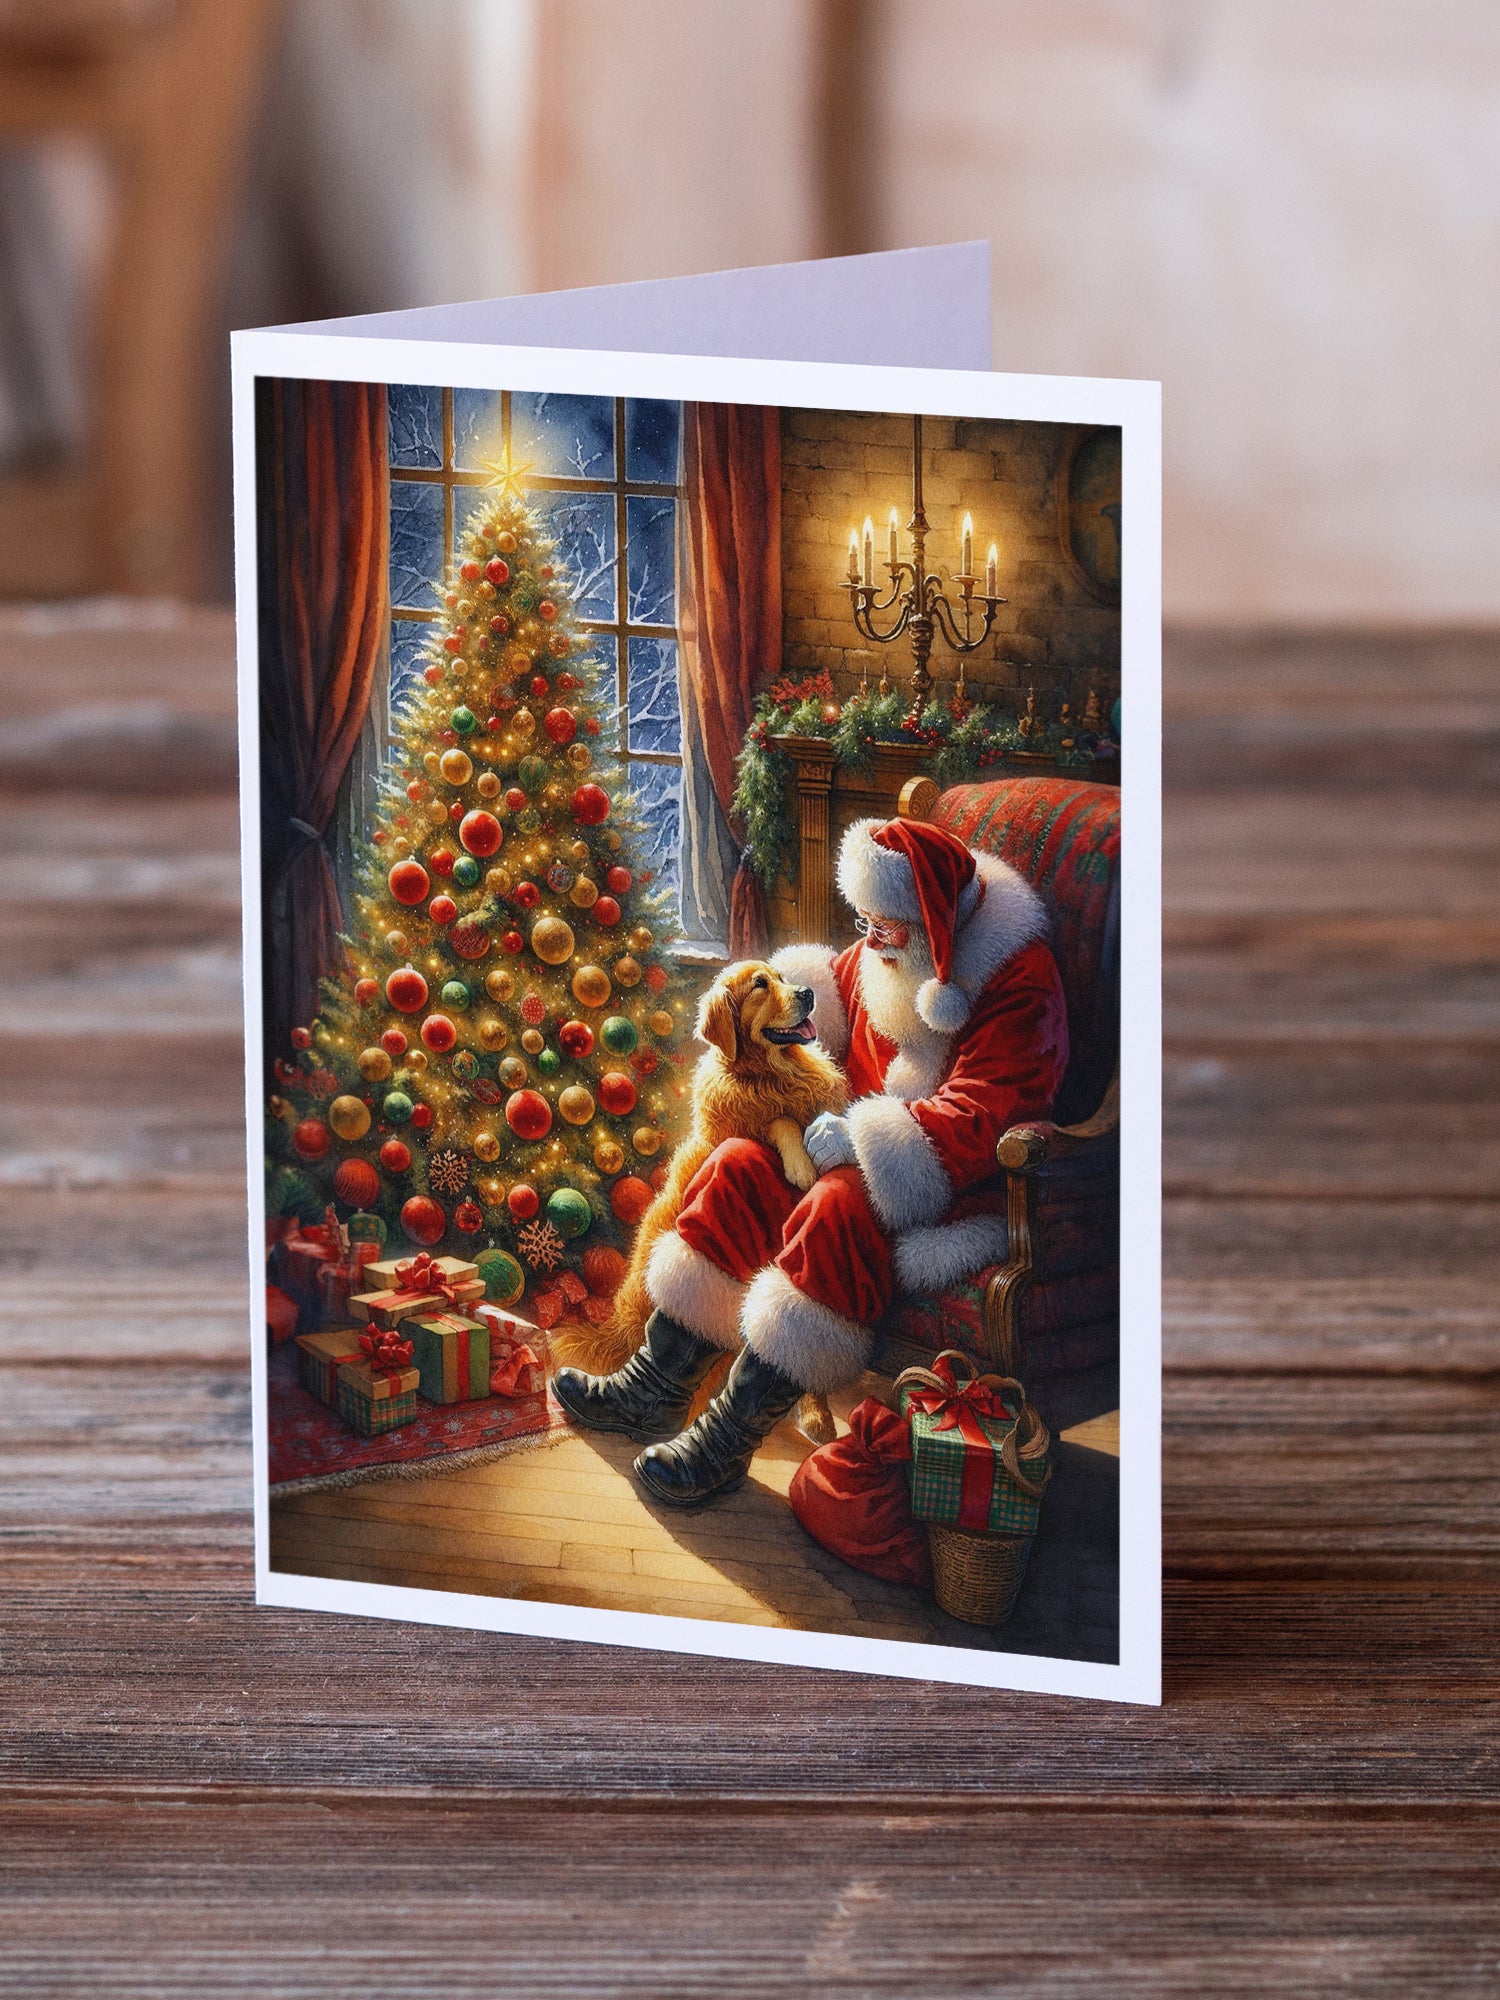 Golden Retriever and Santa Claus Greeting Cards Pack of 8